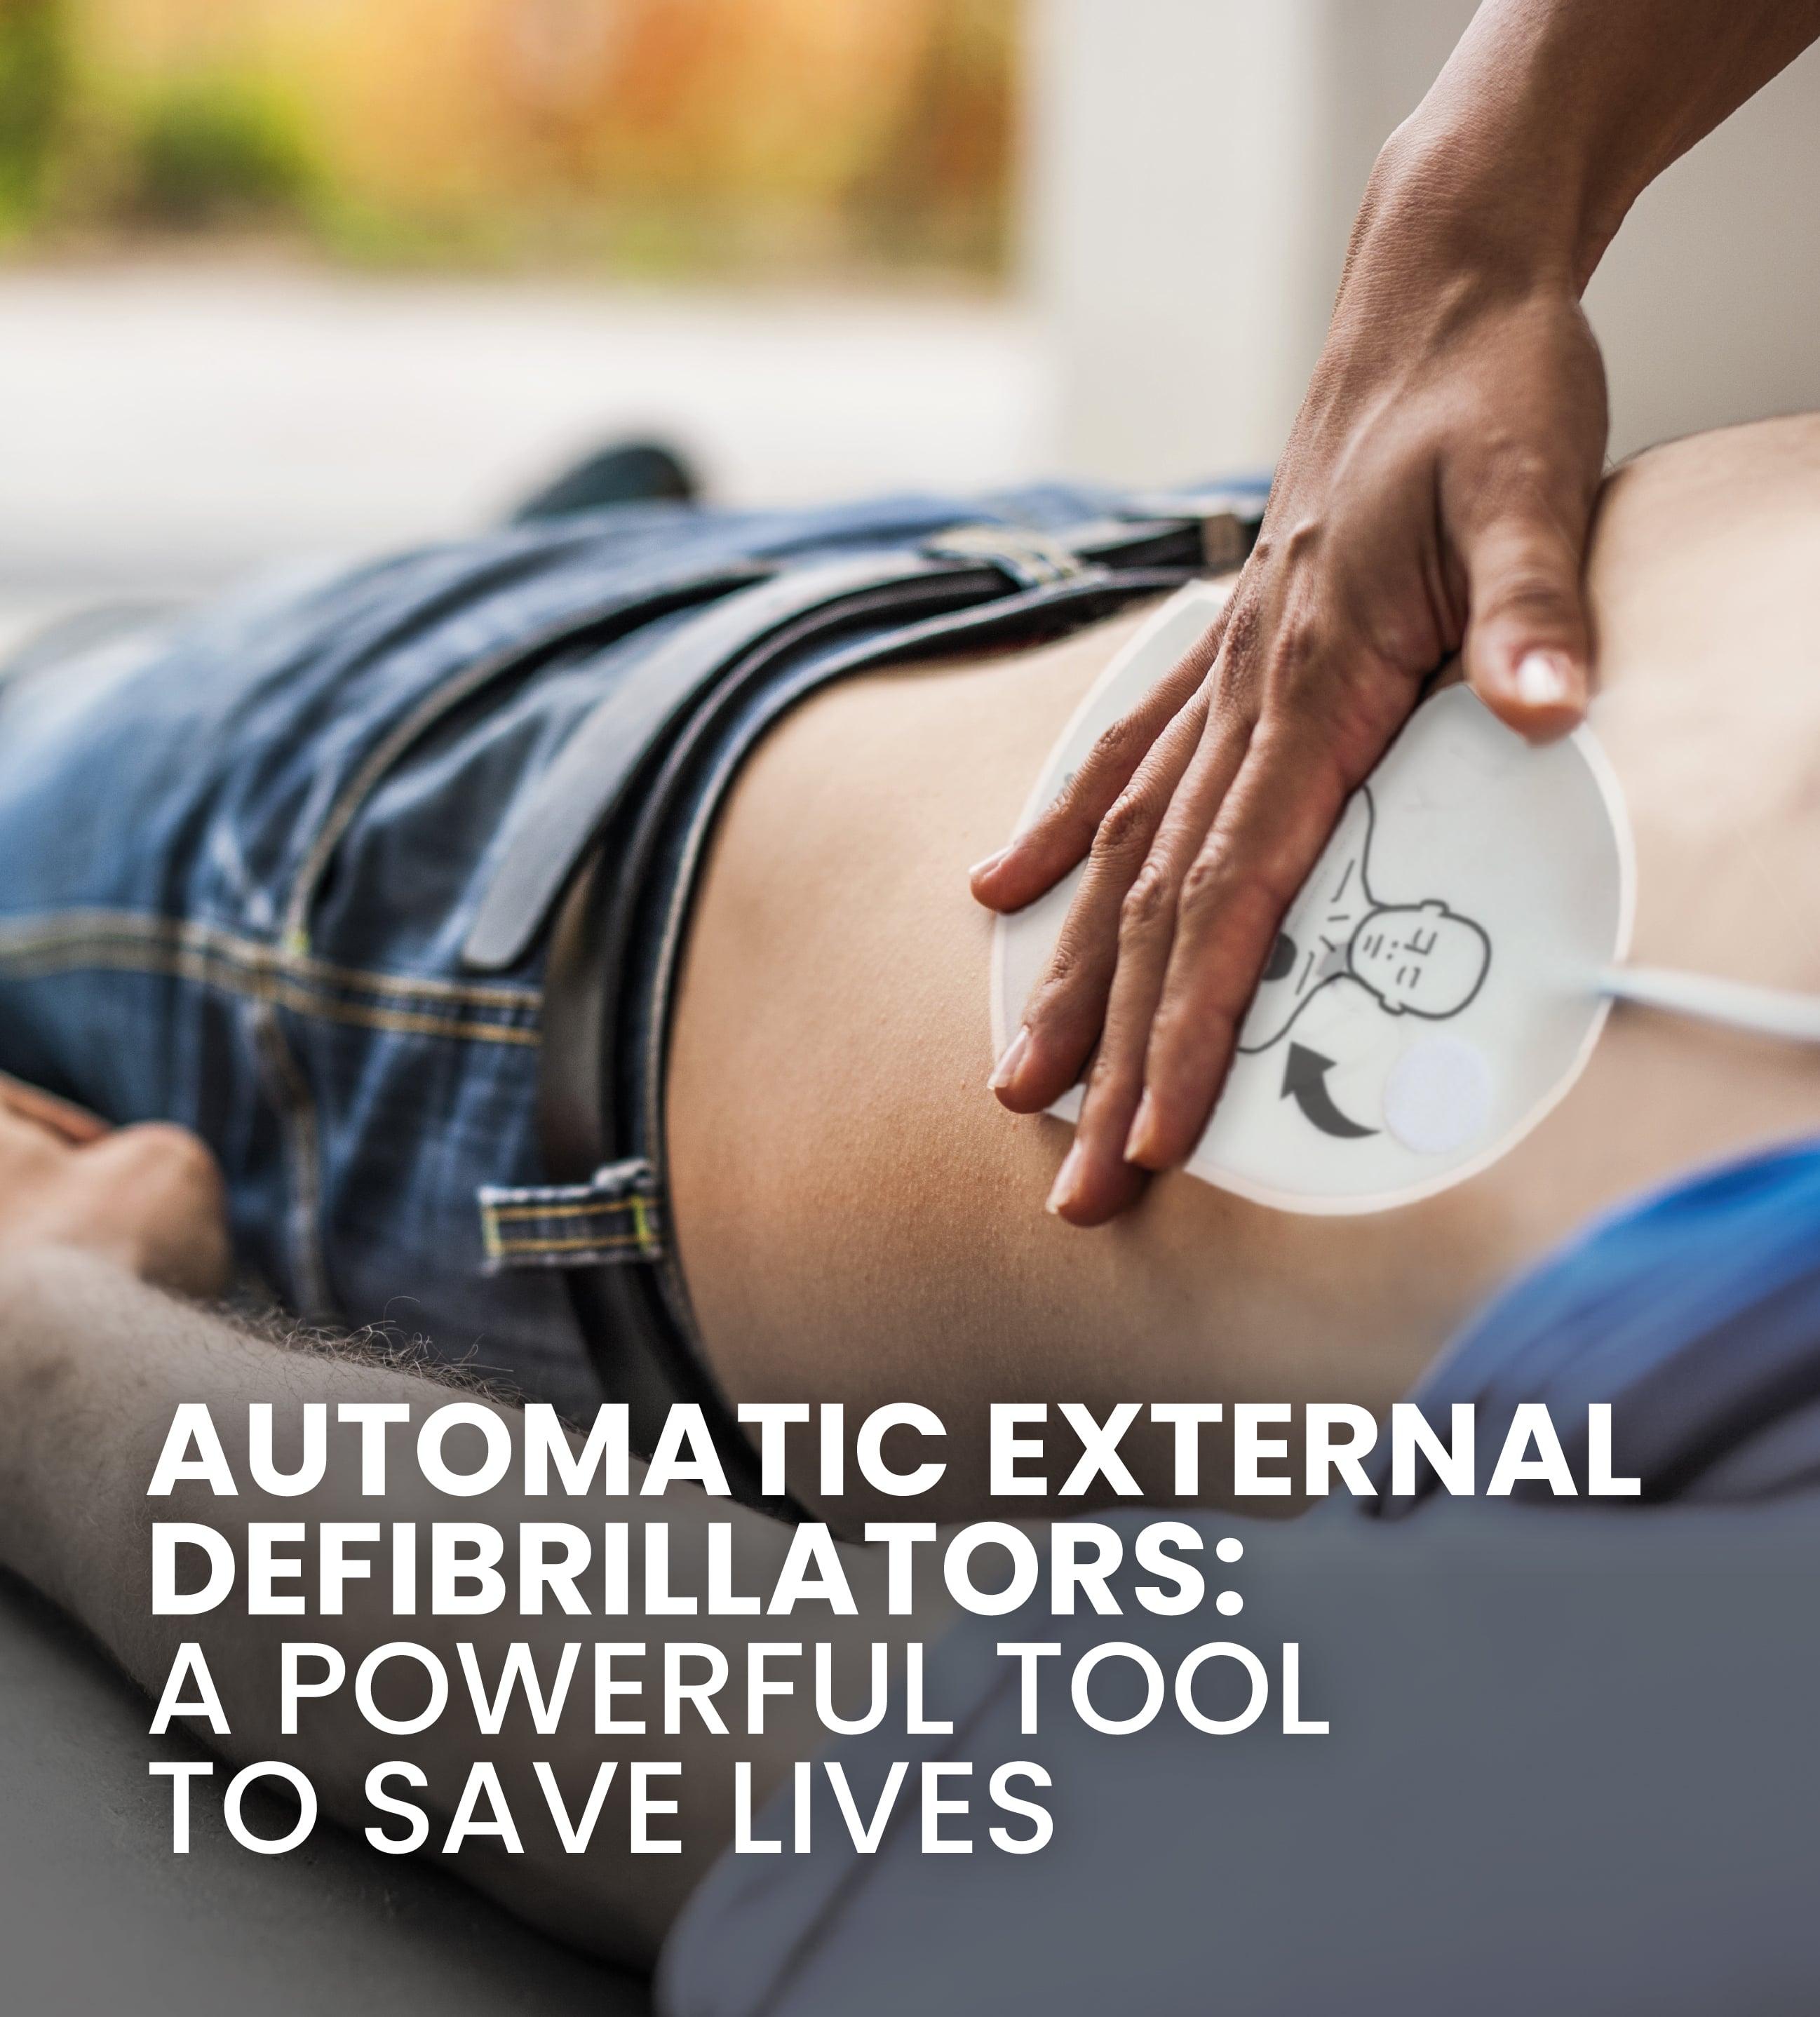 Automatic External Defibrillators: a powerful tool to save lives